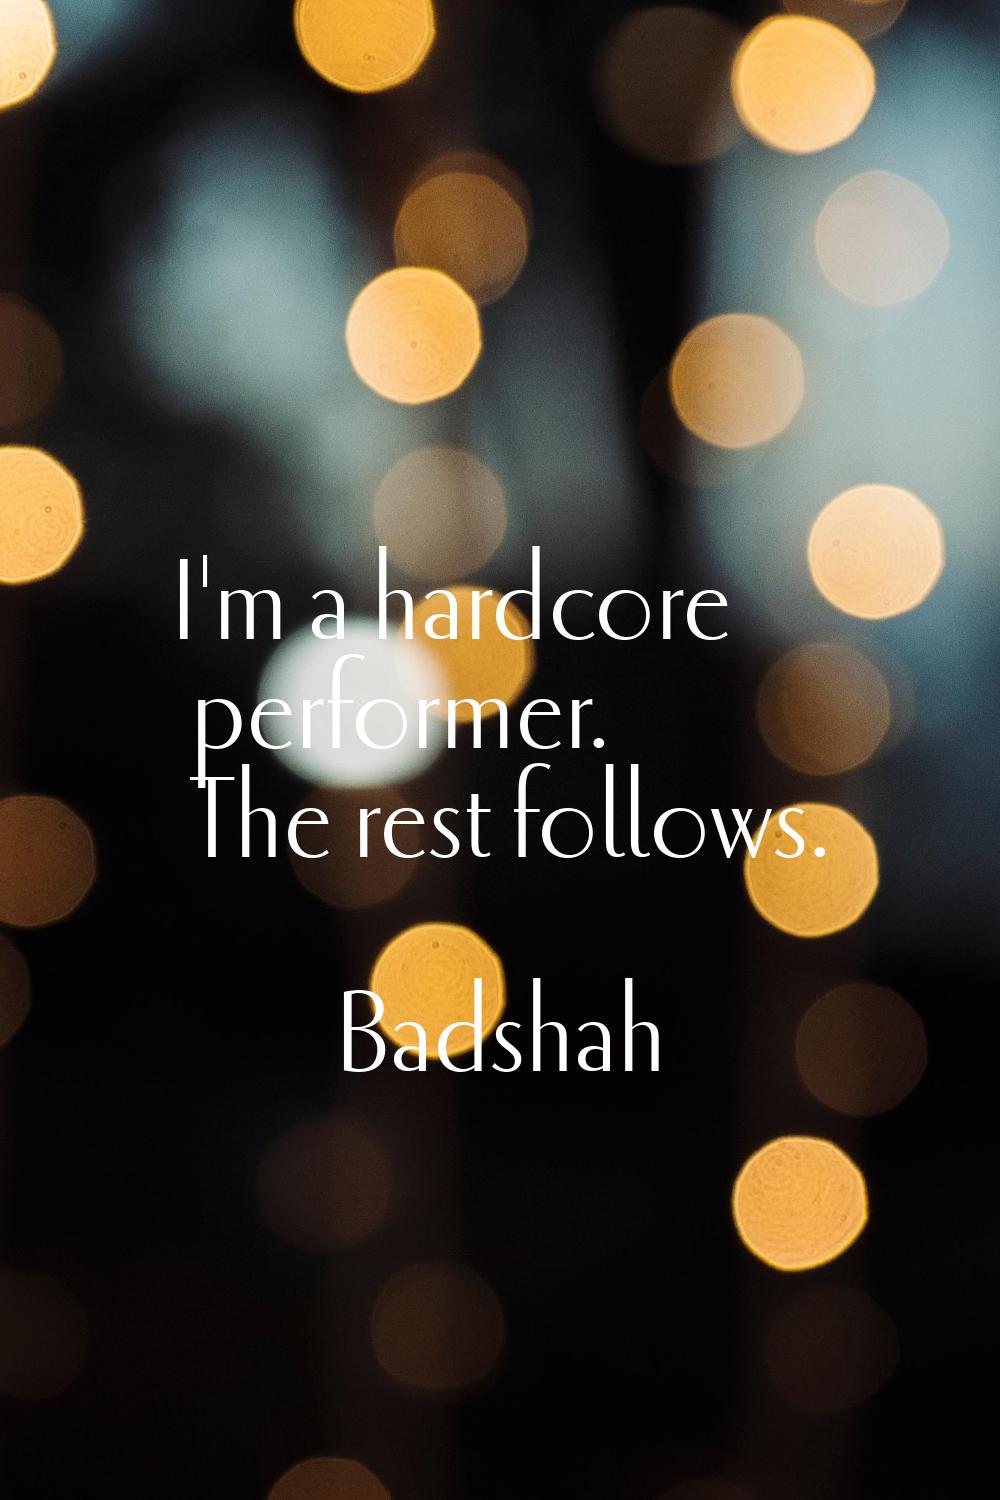 I'm a hardcore performer. The rest follows.